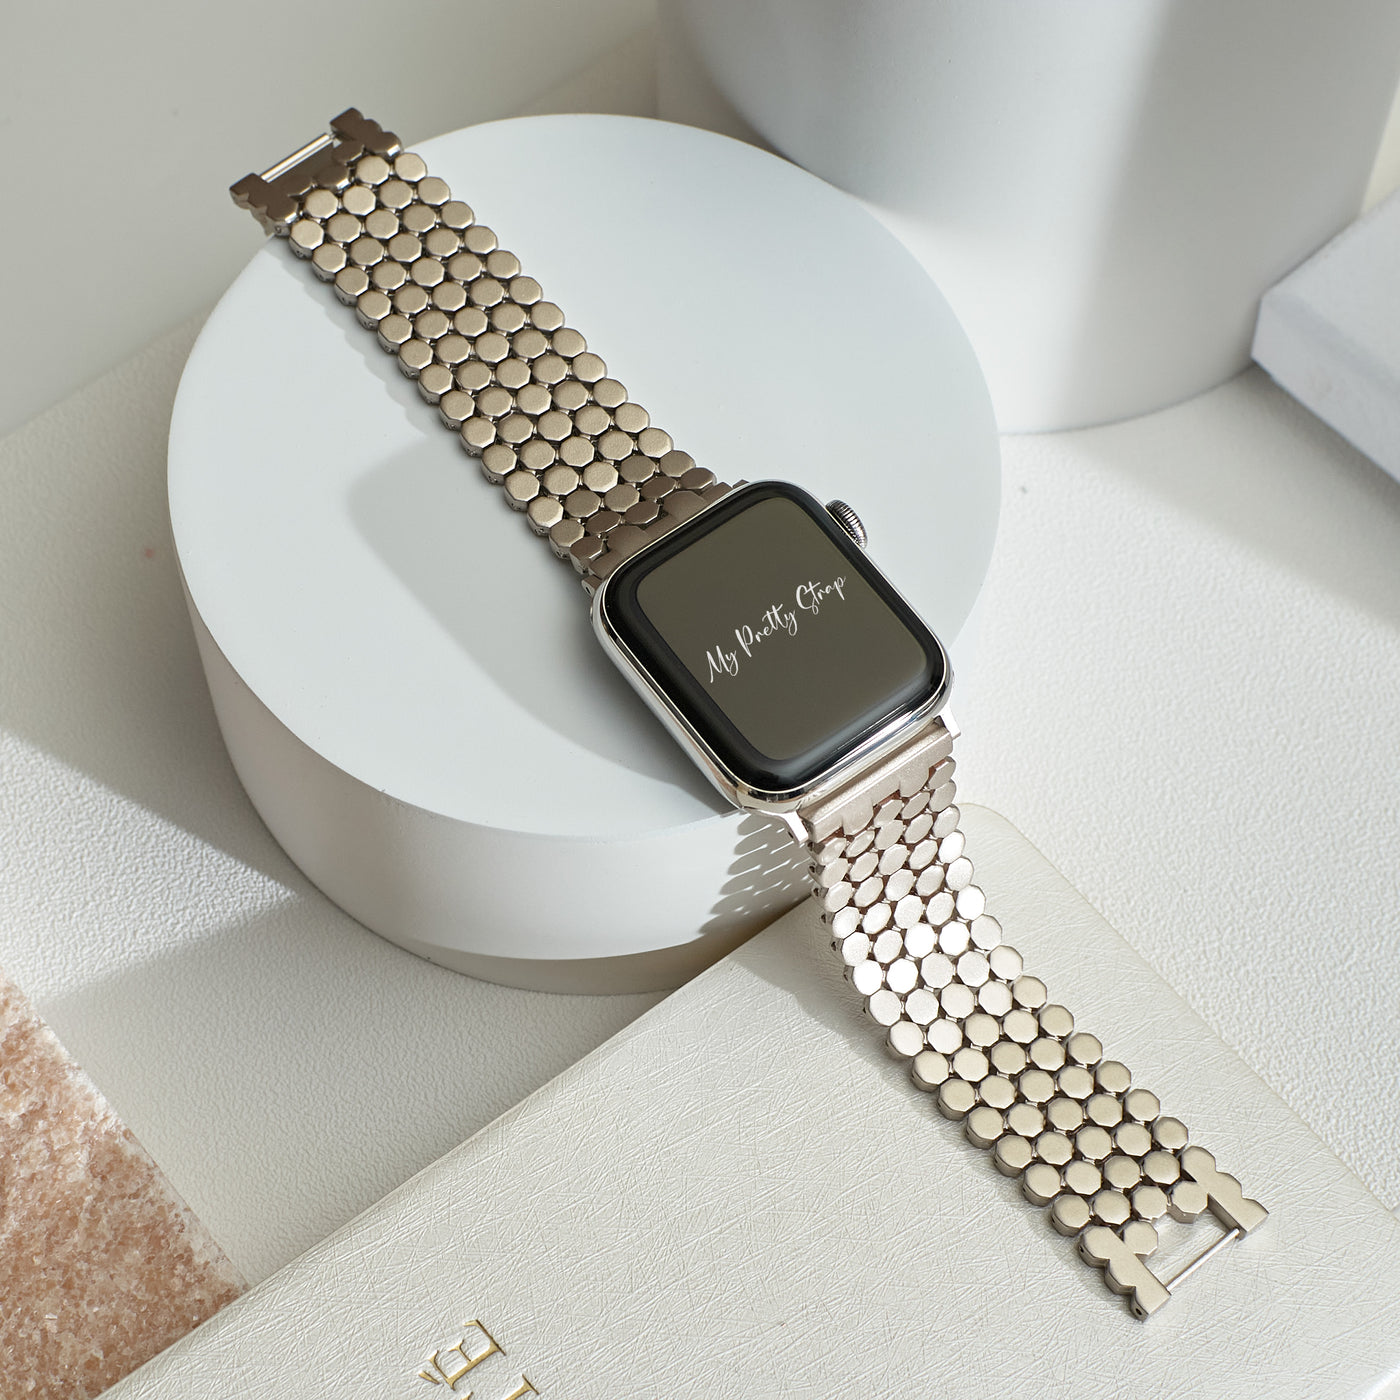 Honeycomb Stainless Steel Strap